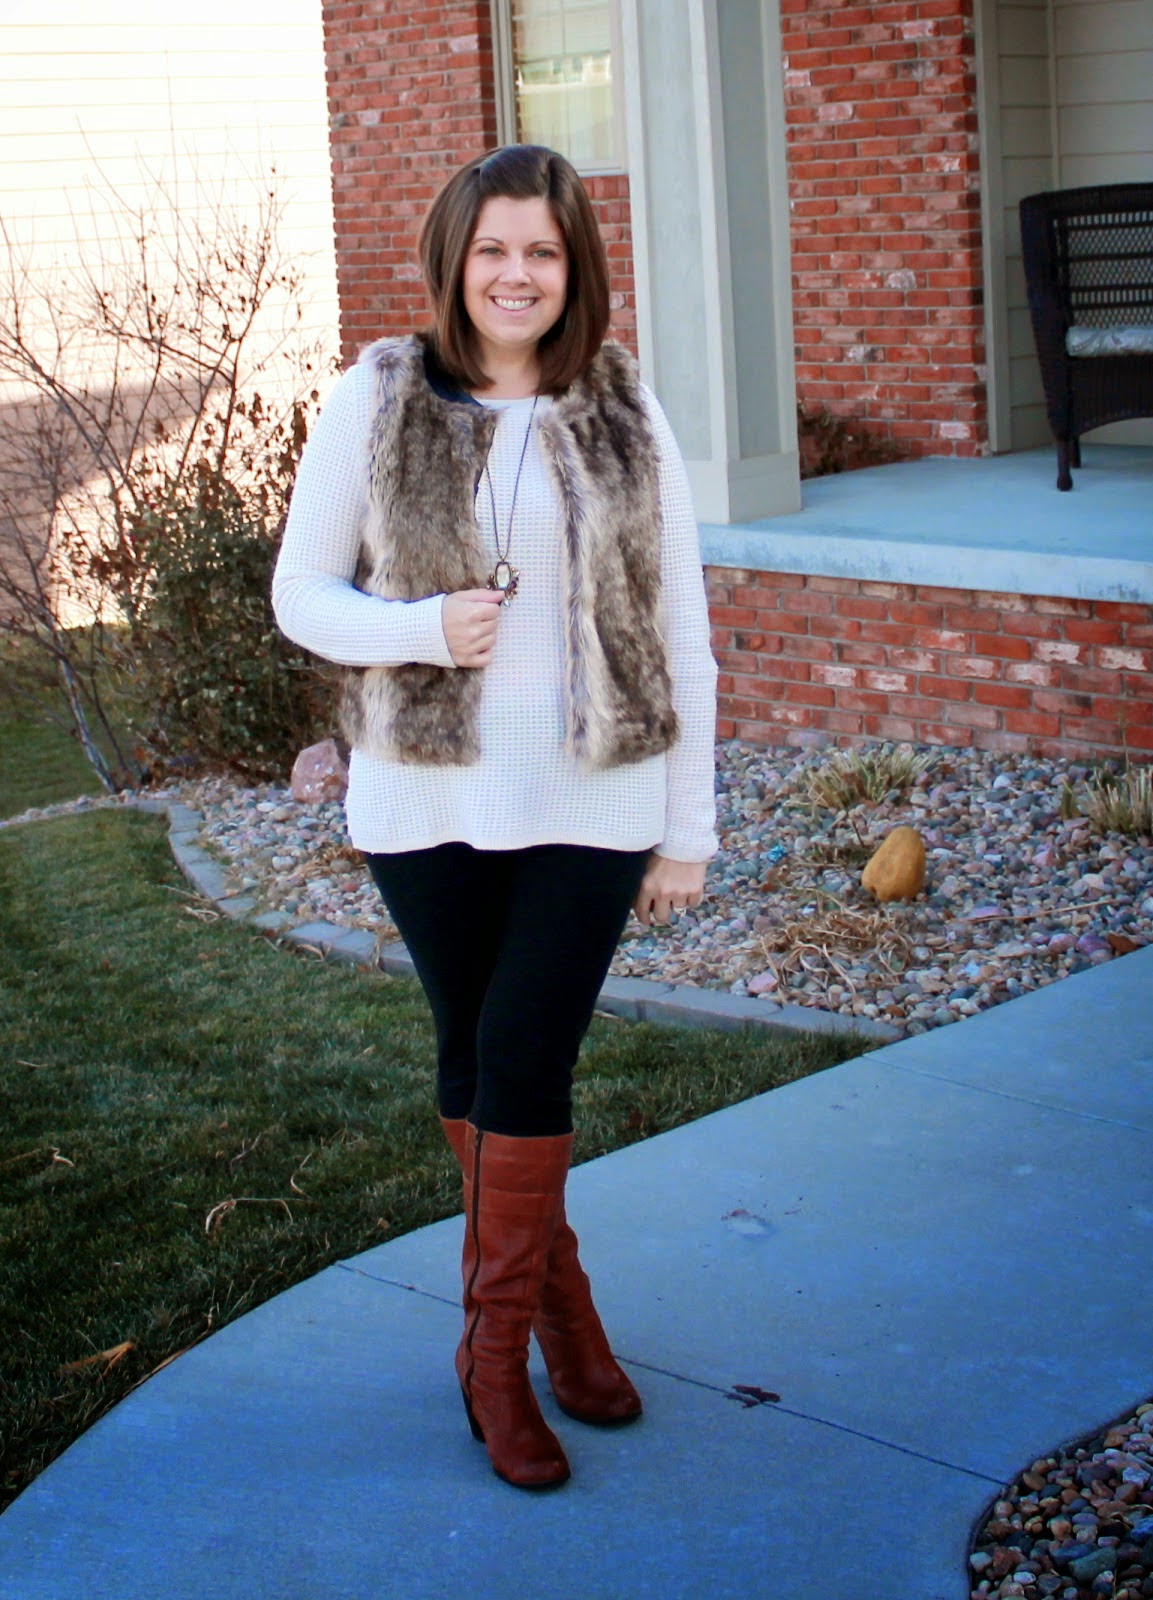 My New Favorite Outfit: How to Style: A Fur Vest